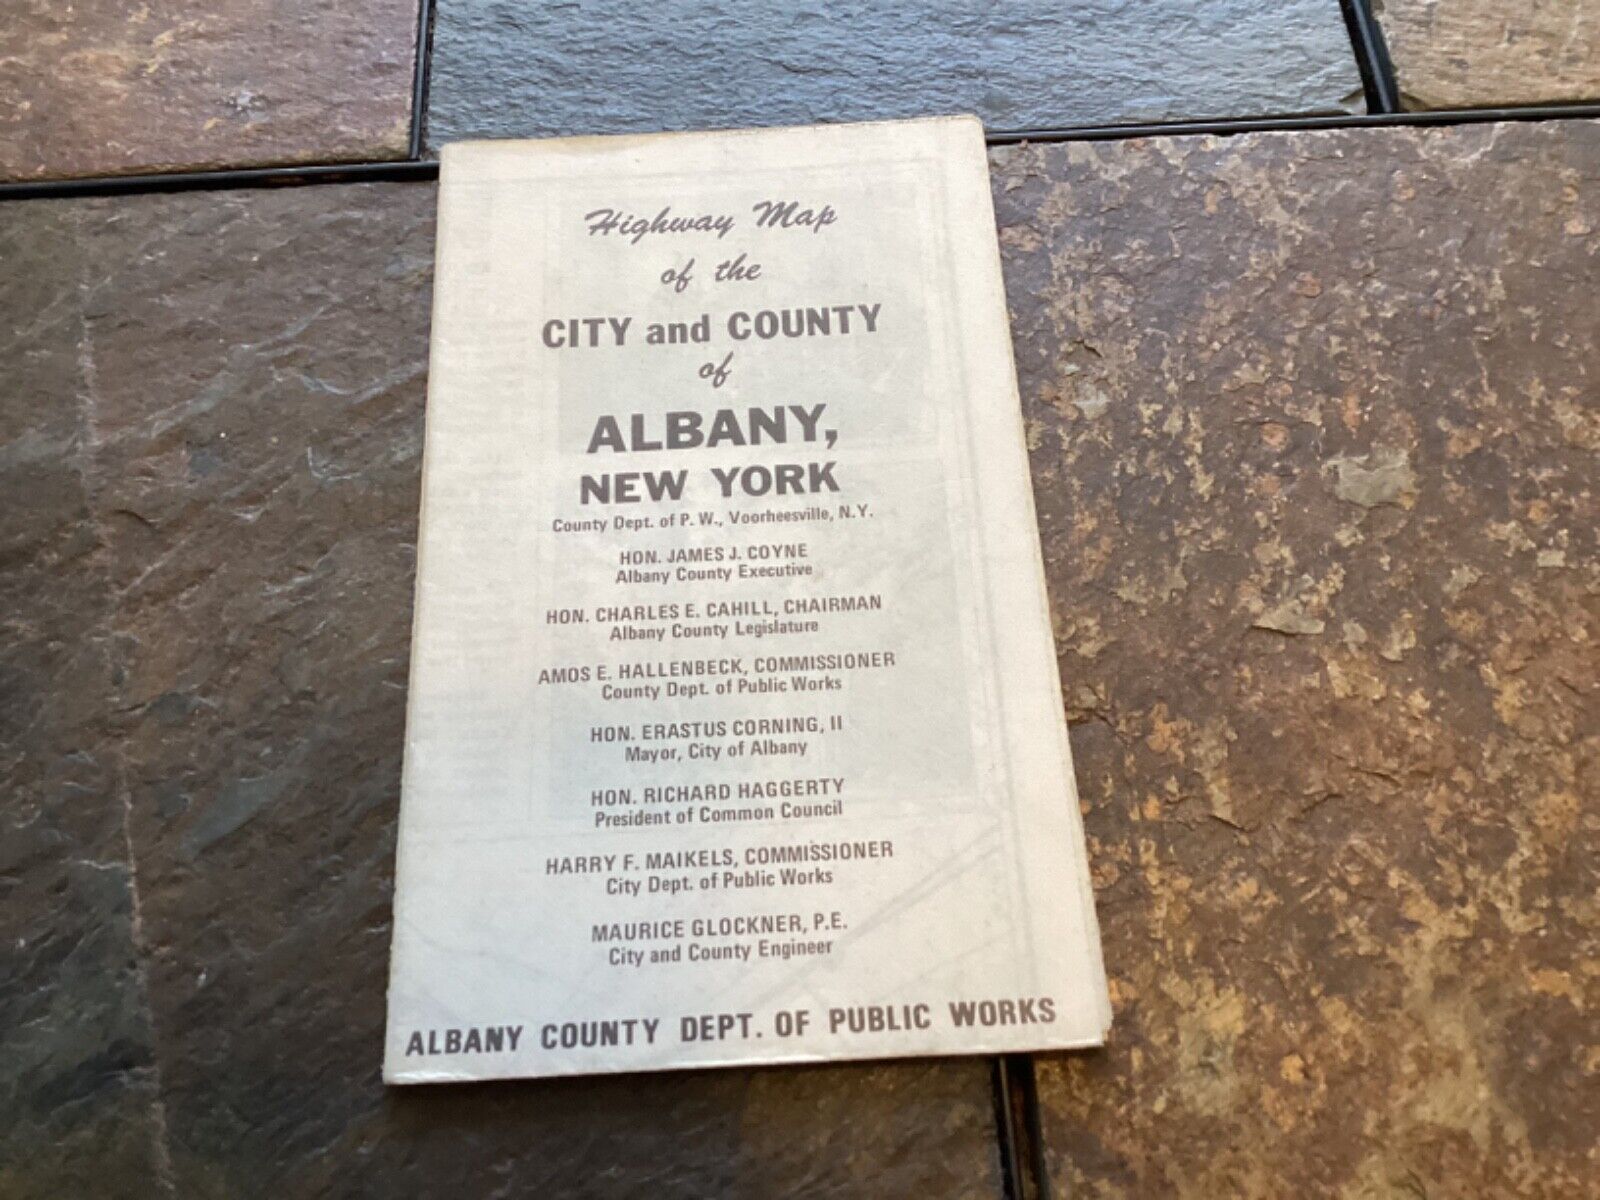 1950s Albany Public Works Highway Map of the City and County of Albany, New York